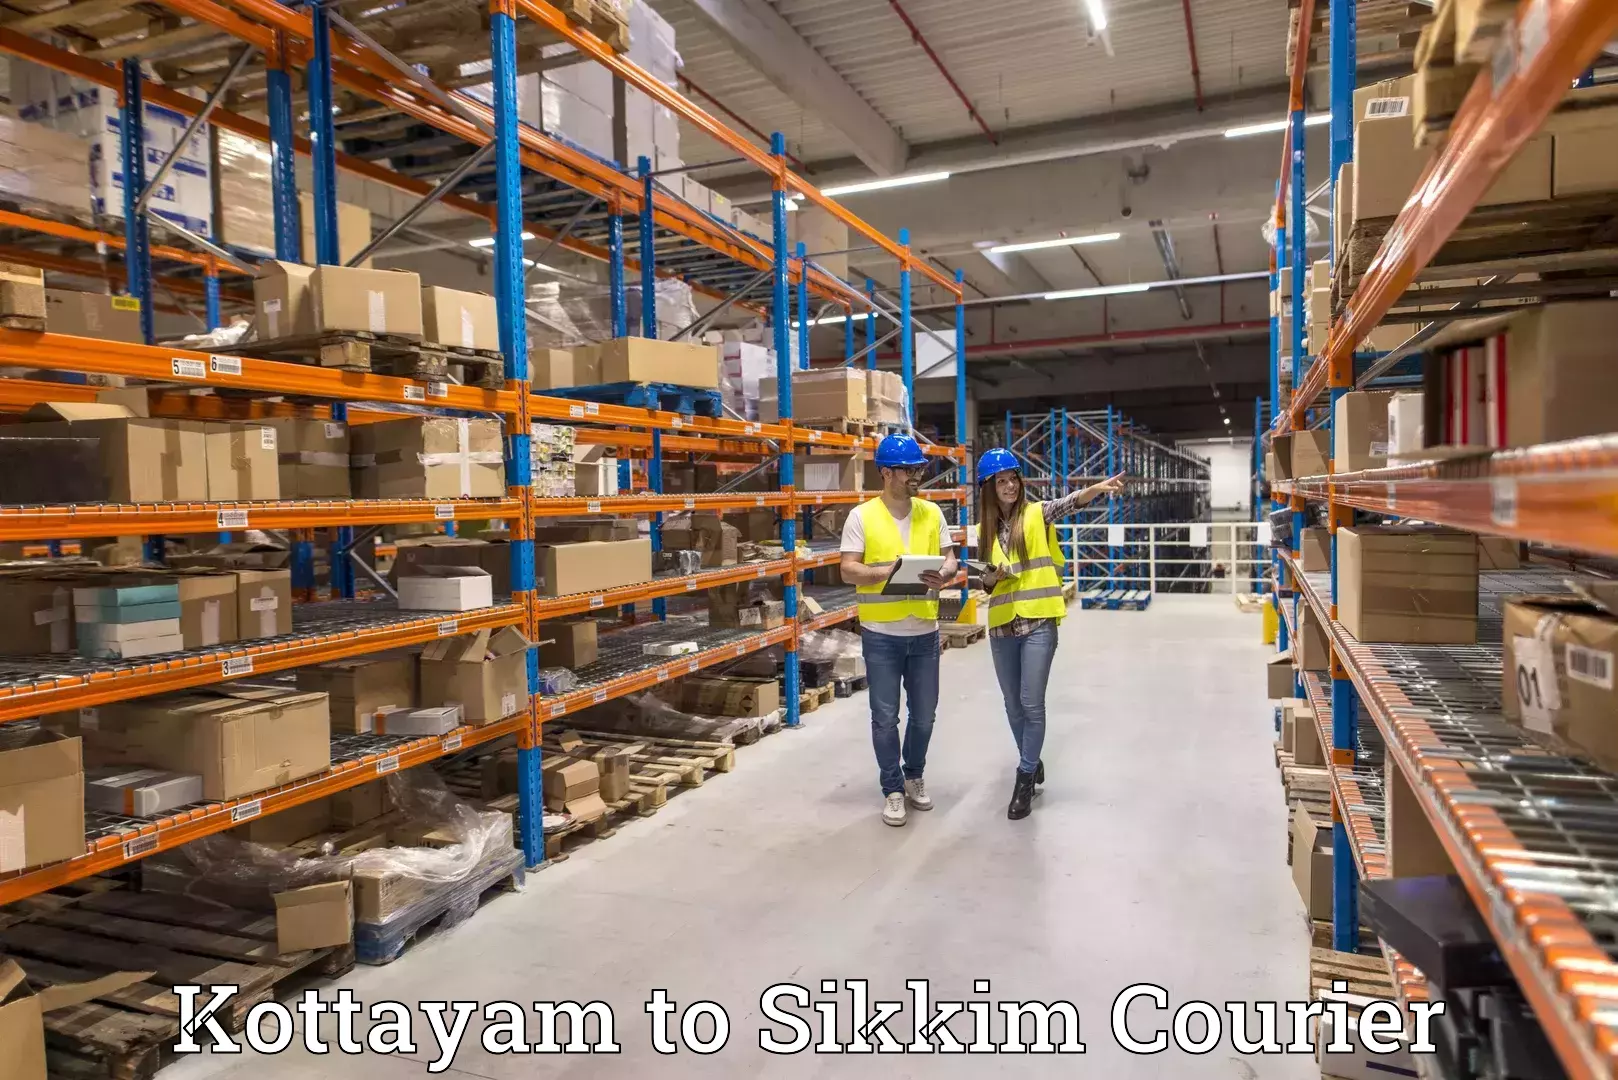 Automated shipping processes Kottayam to Pelling